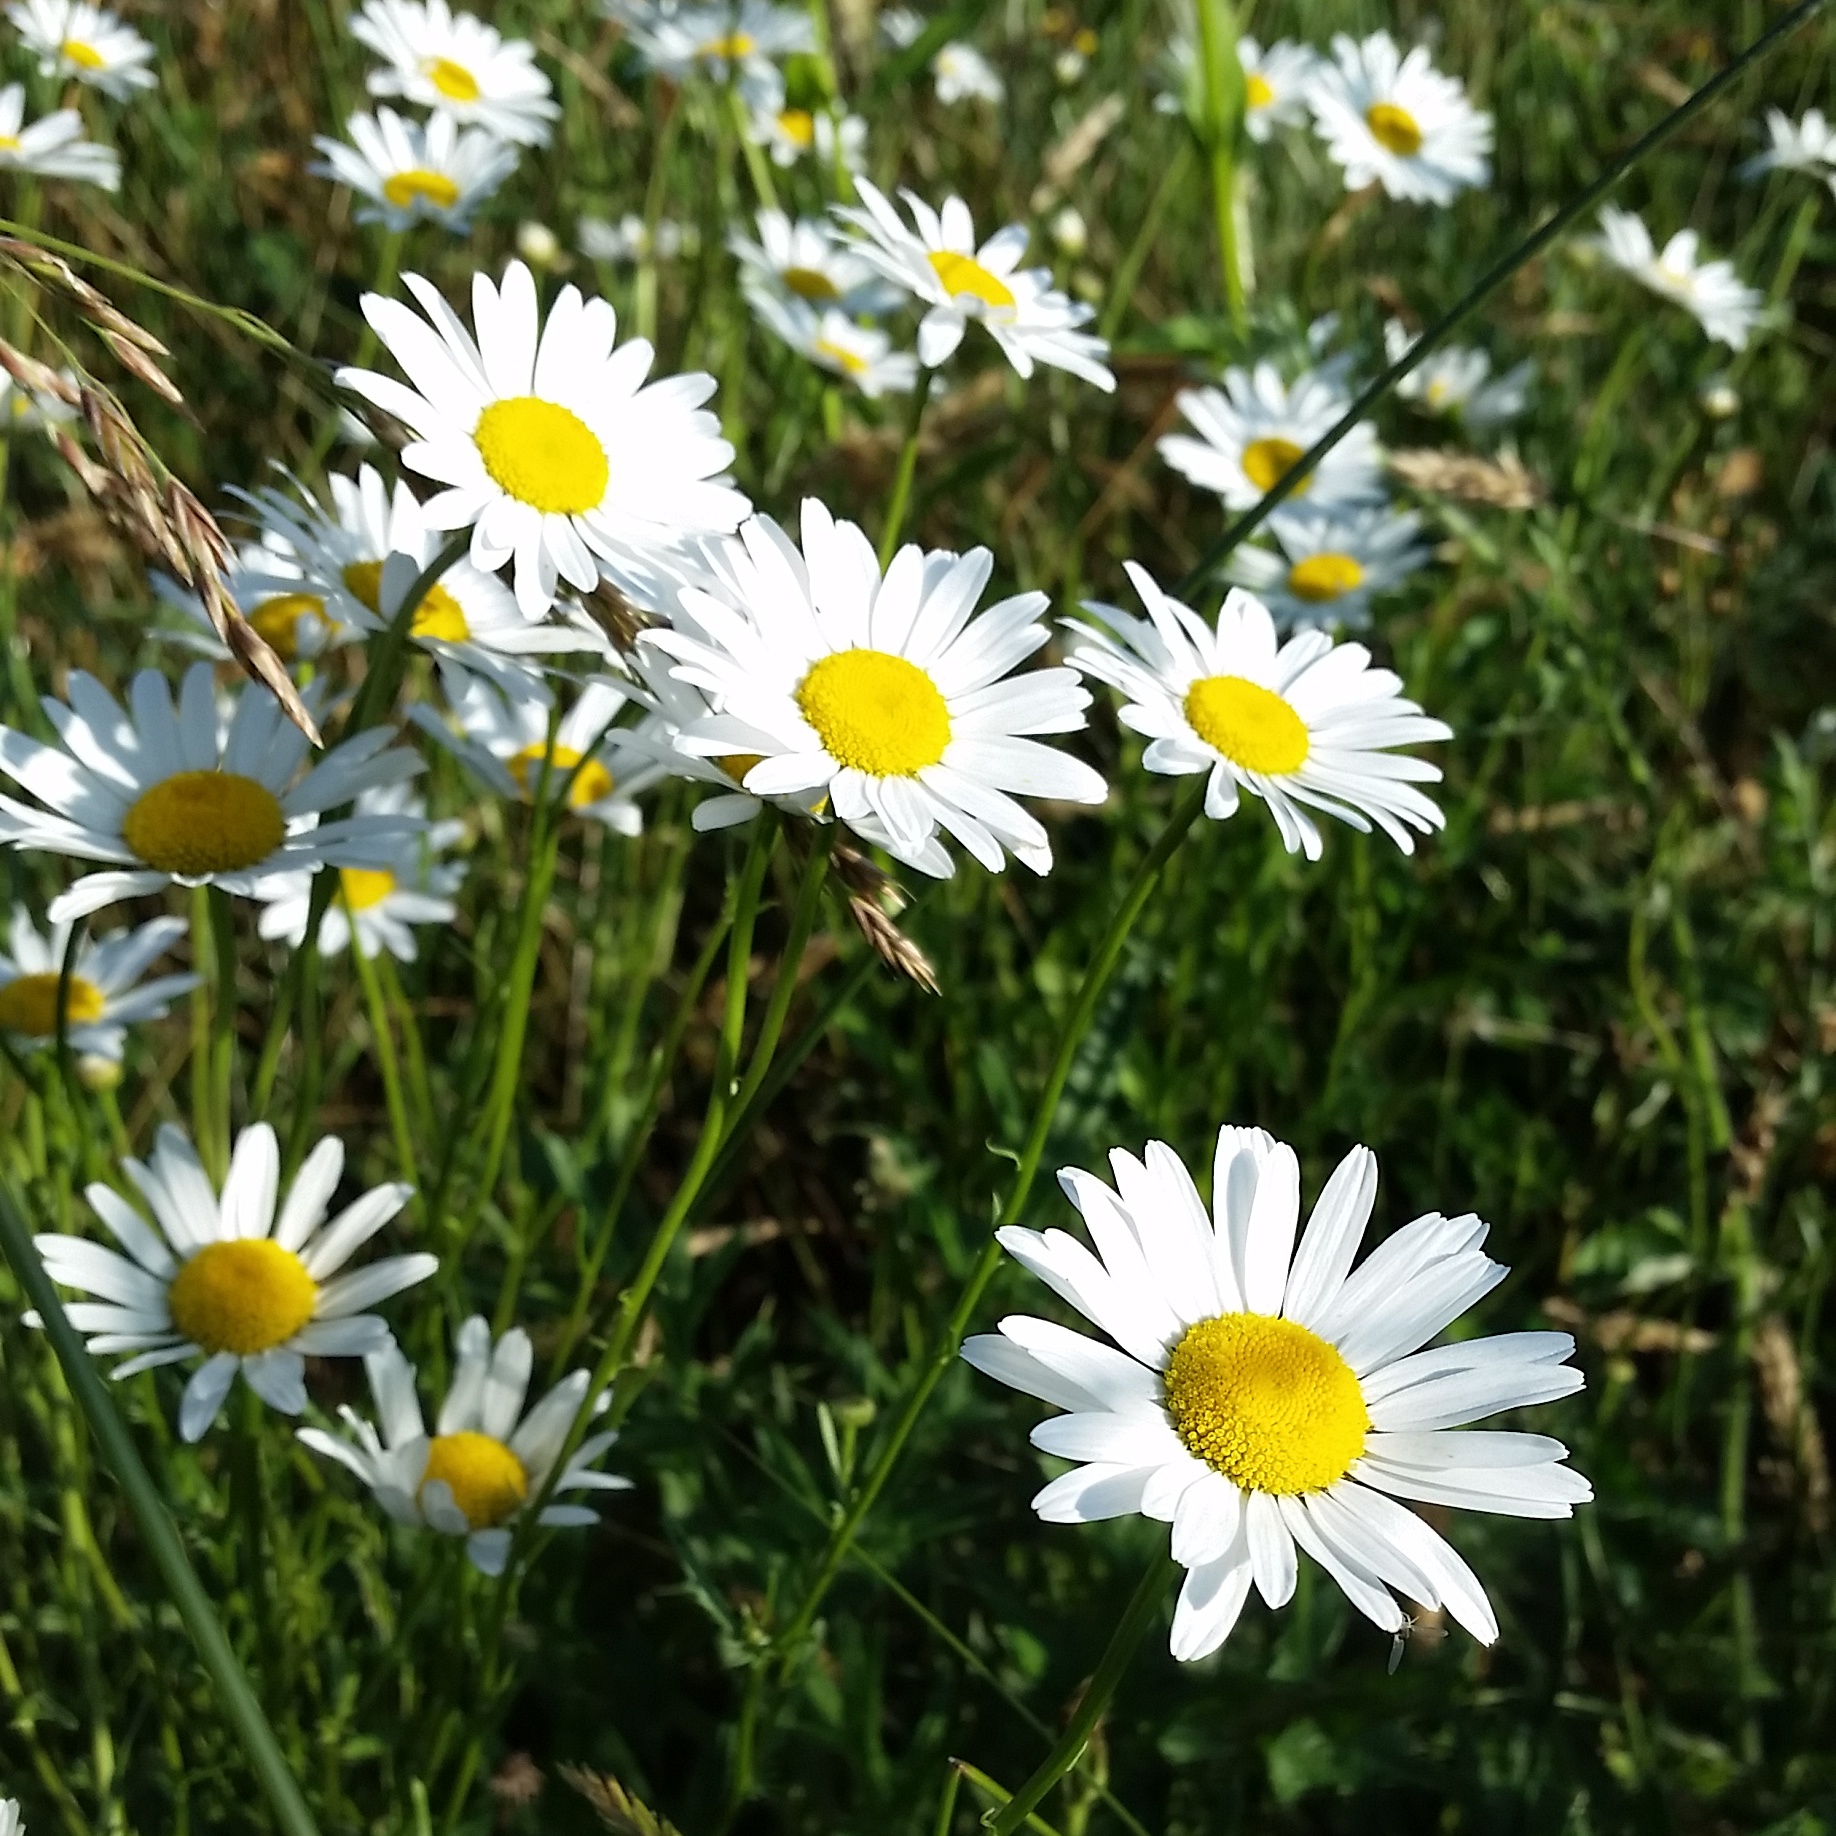 Daisy - planting, care, blooming of oxeye, the 5th anniversary daisies!